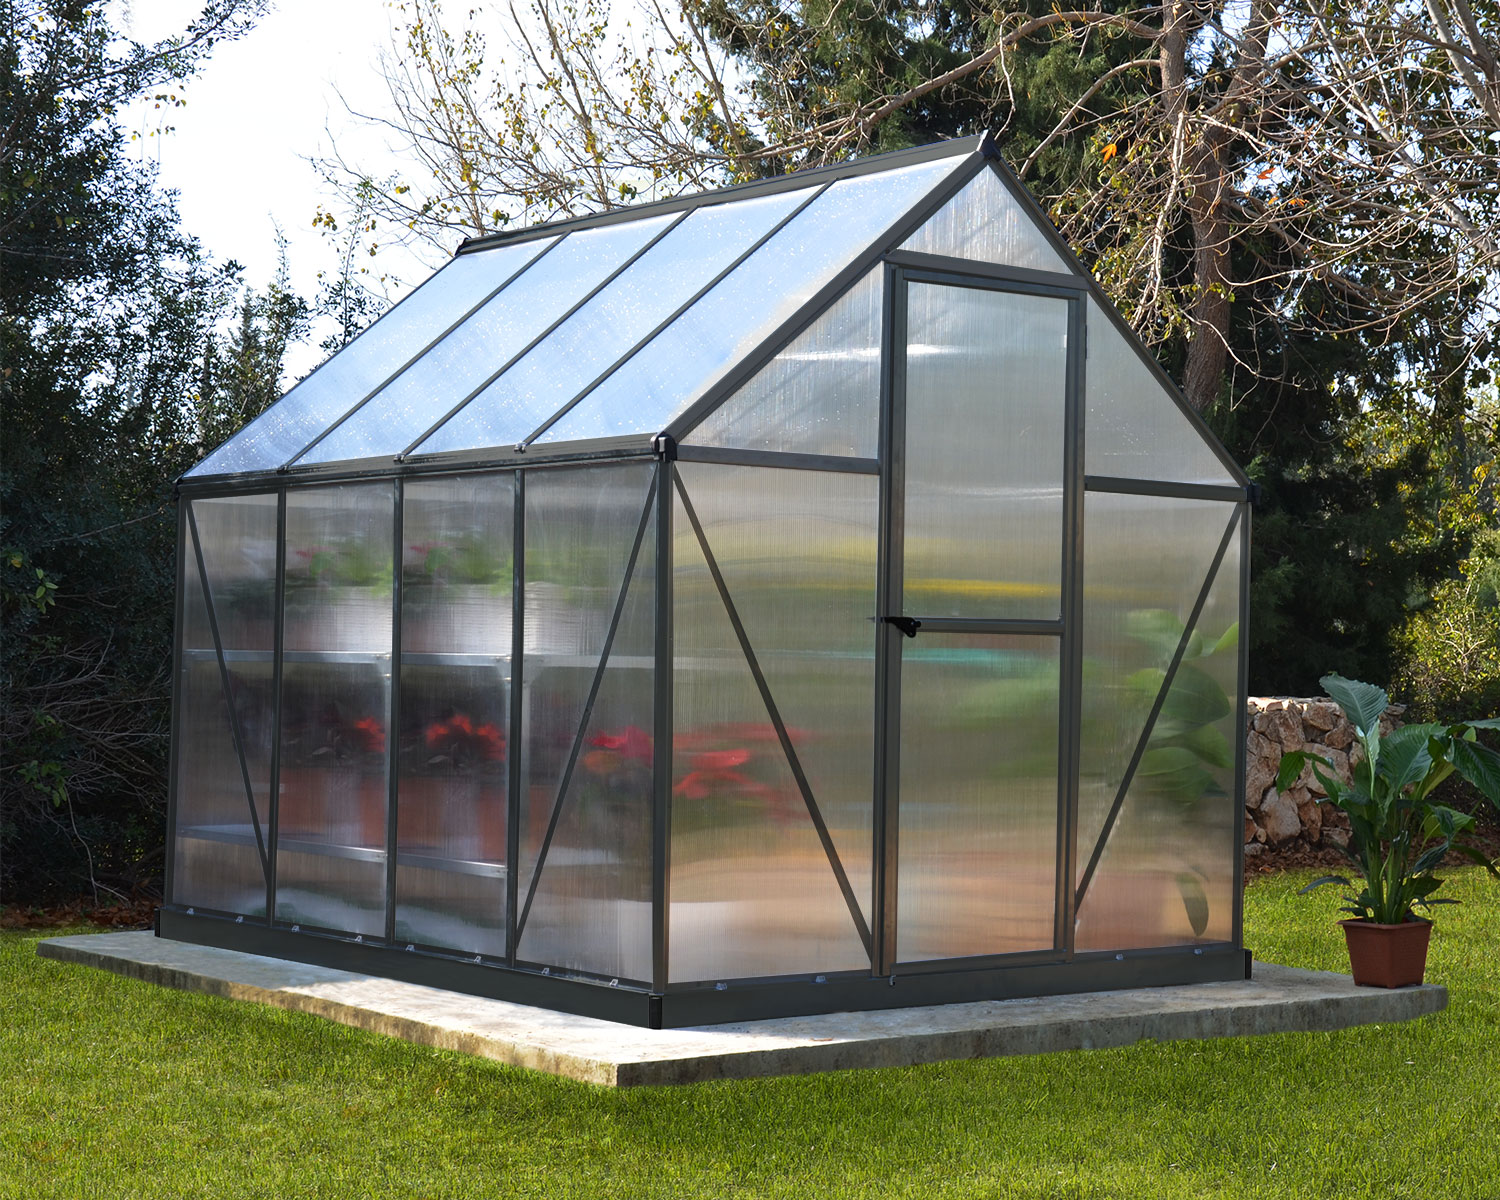 Mythos 6 ft. x 8 ft. Greenhouse Grey Structure &amp; Twinwall Panels outside on a lawn